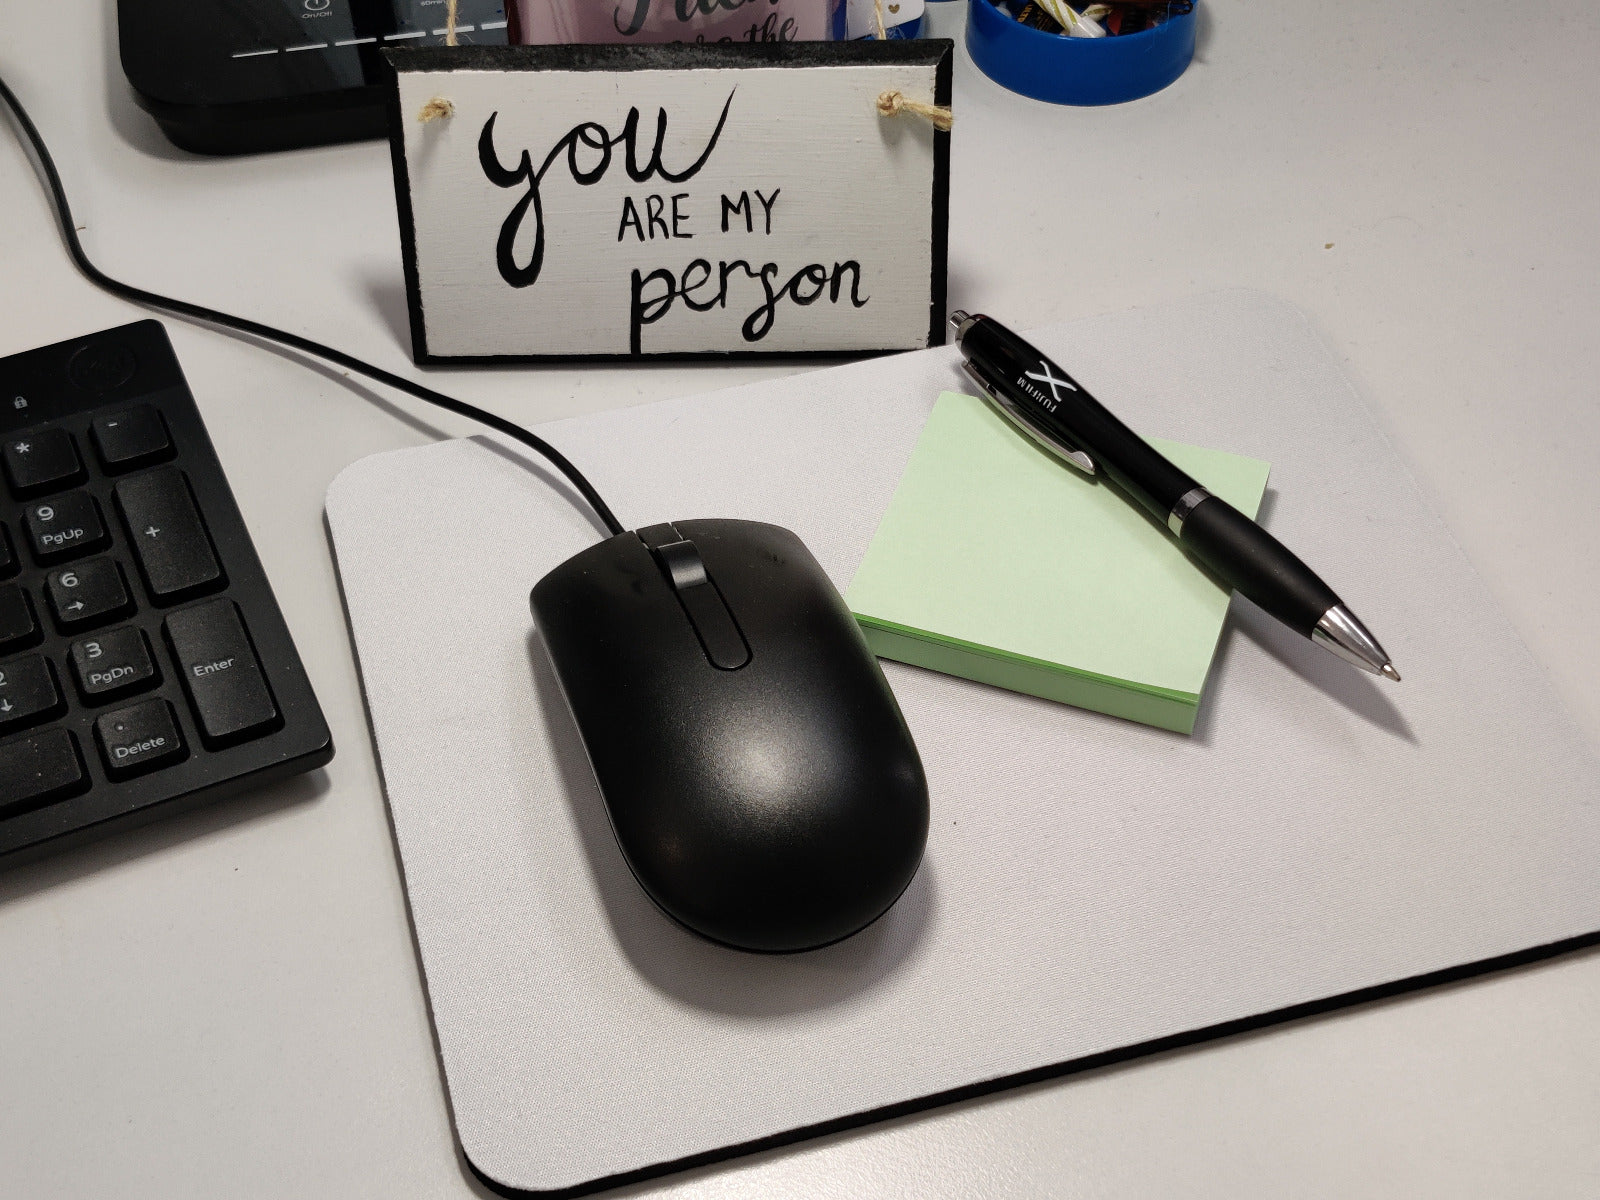 Product Image of Personalised Mouse Mat for Offices, with your image and text